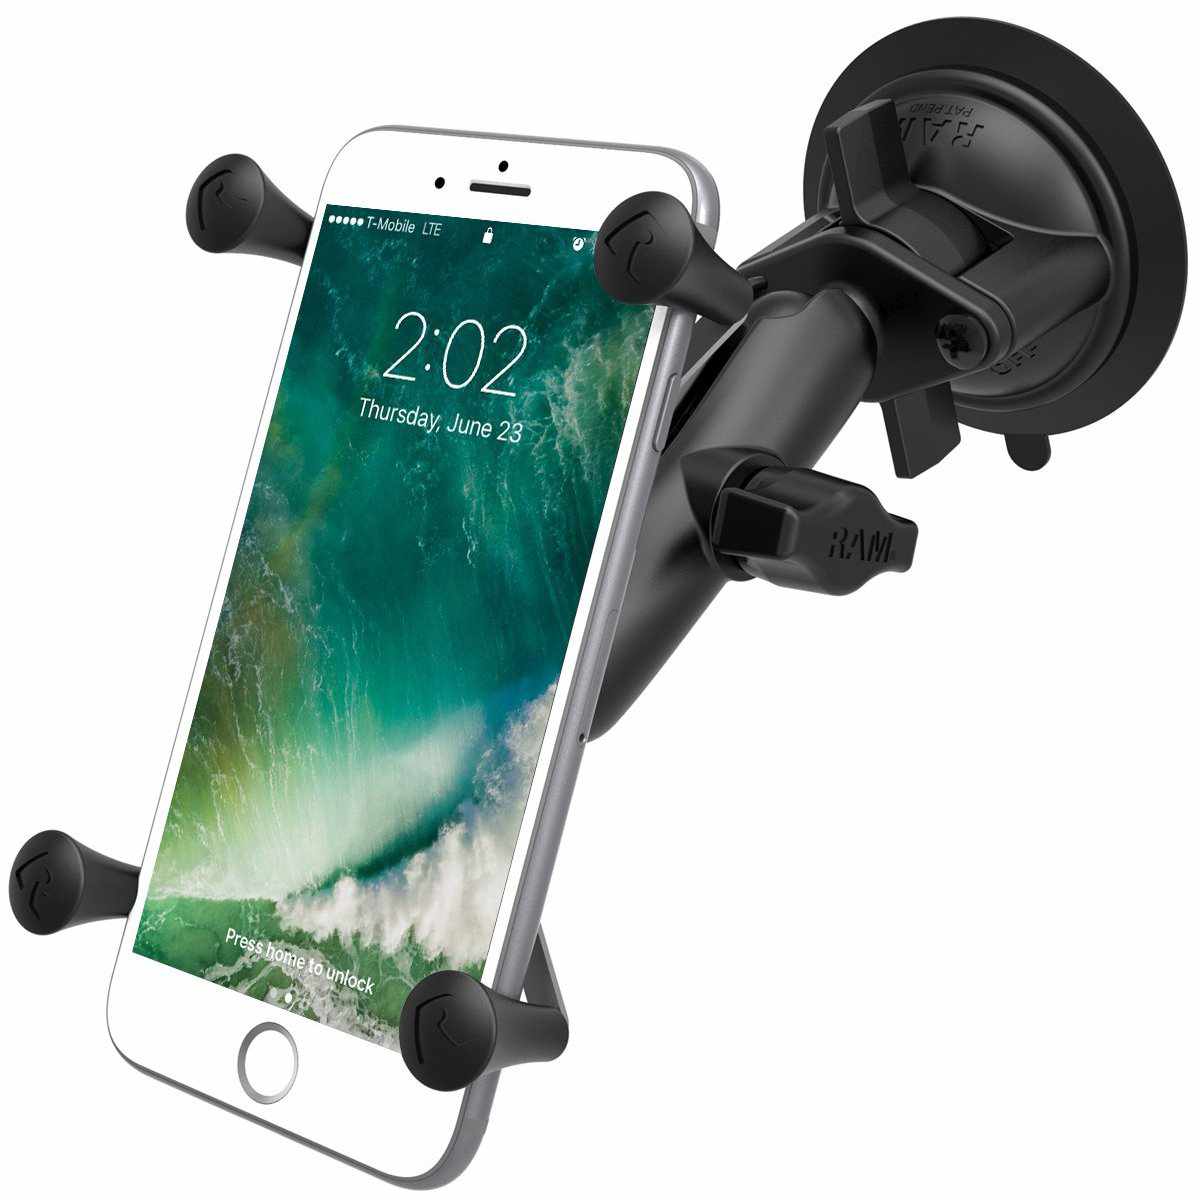 Ram Mounts from Modest Mounts. The Only Car Phone Mount That Doesn